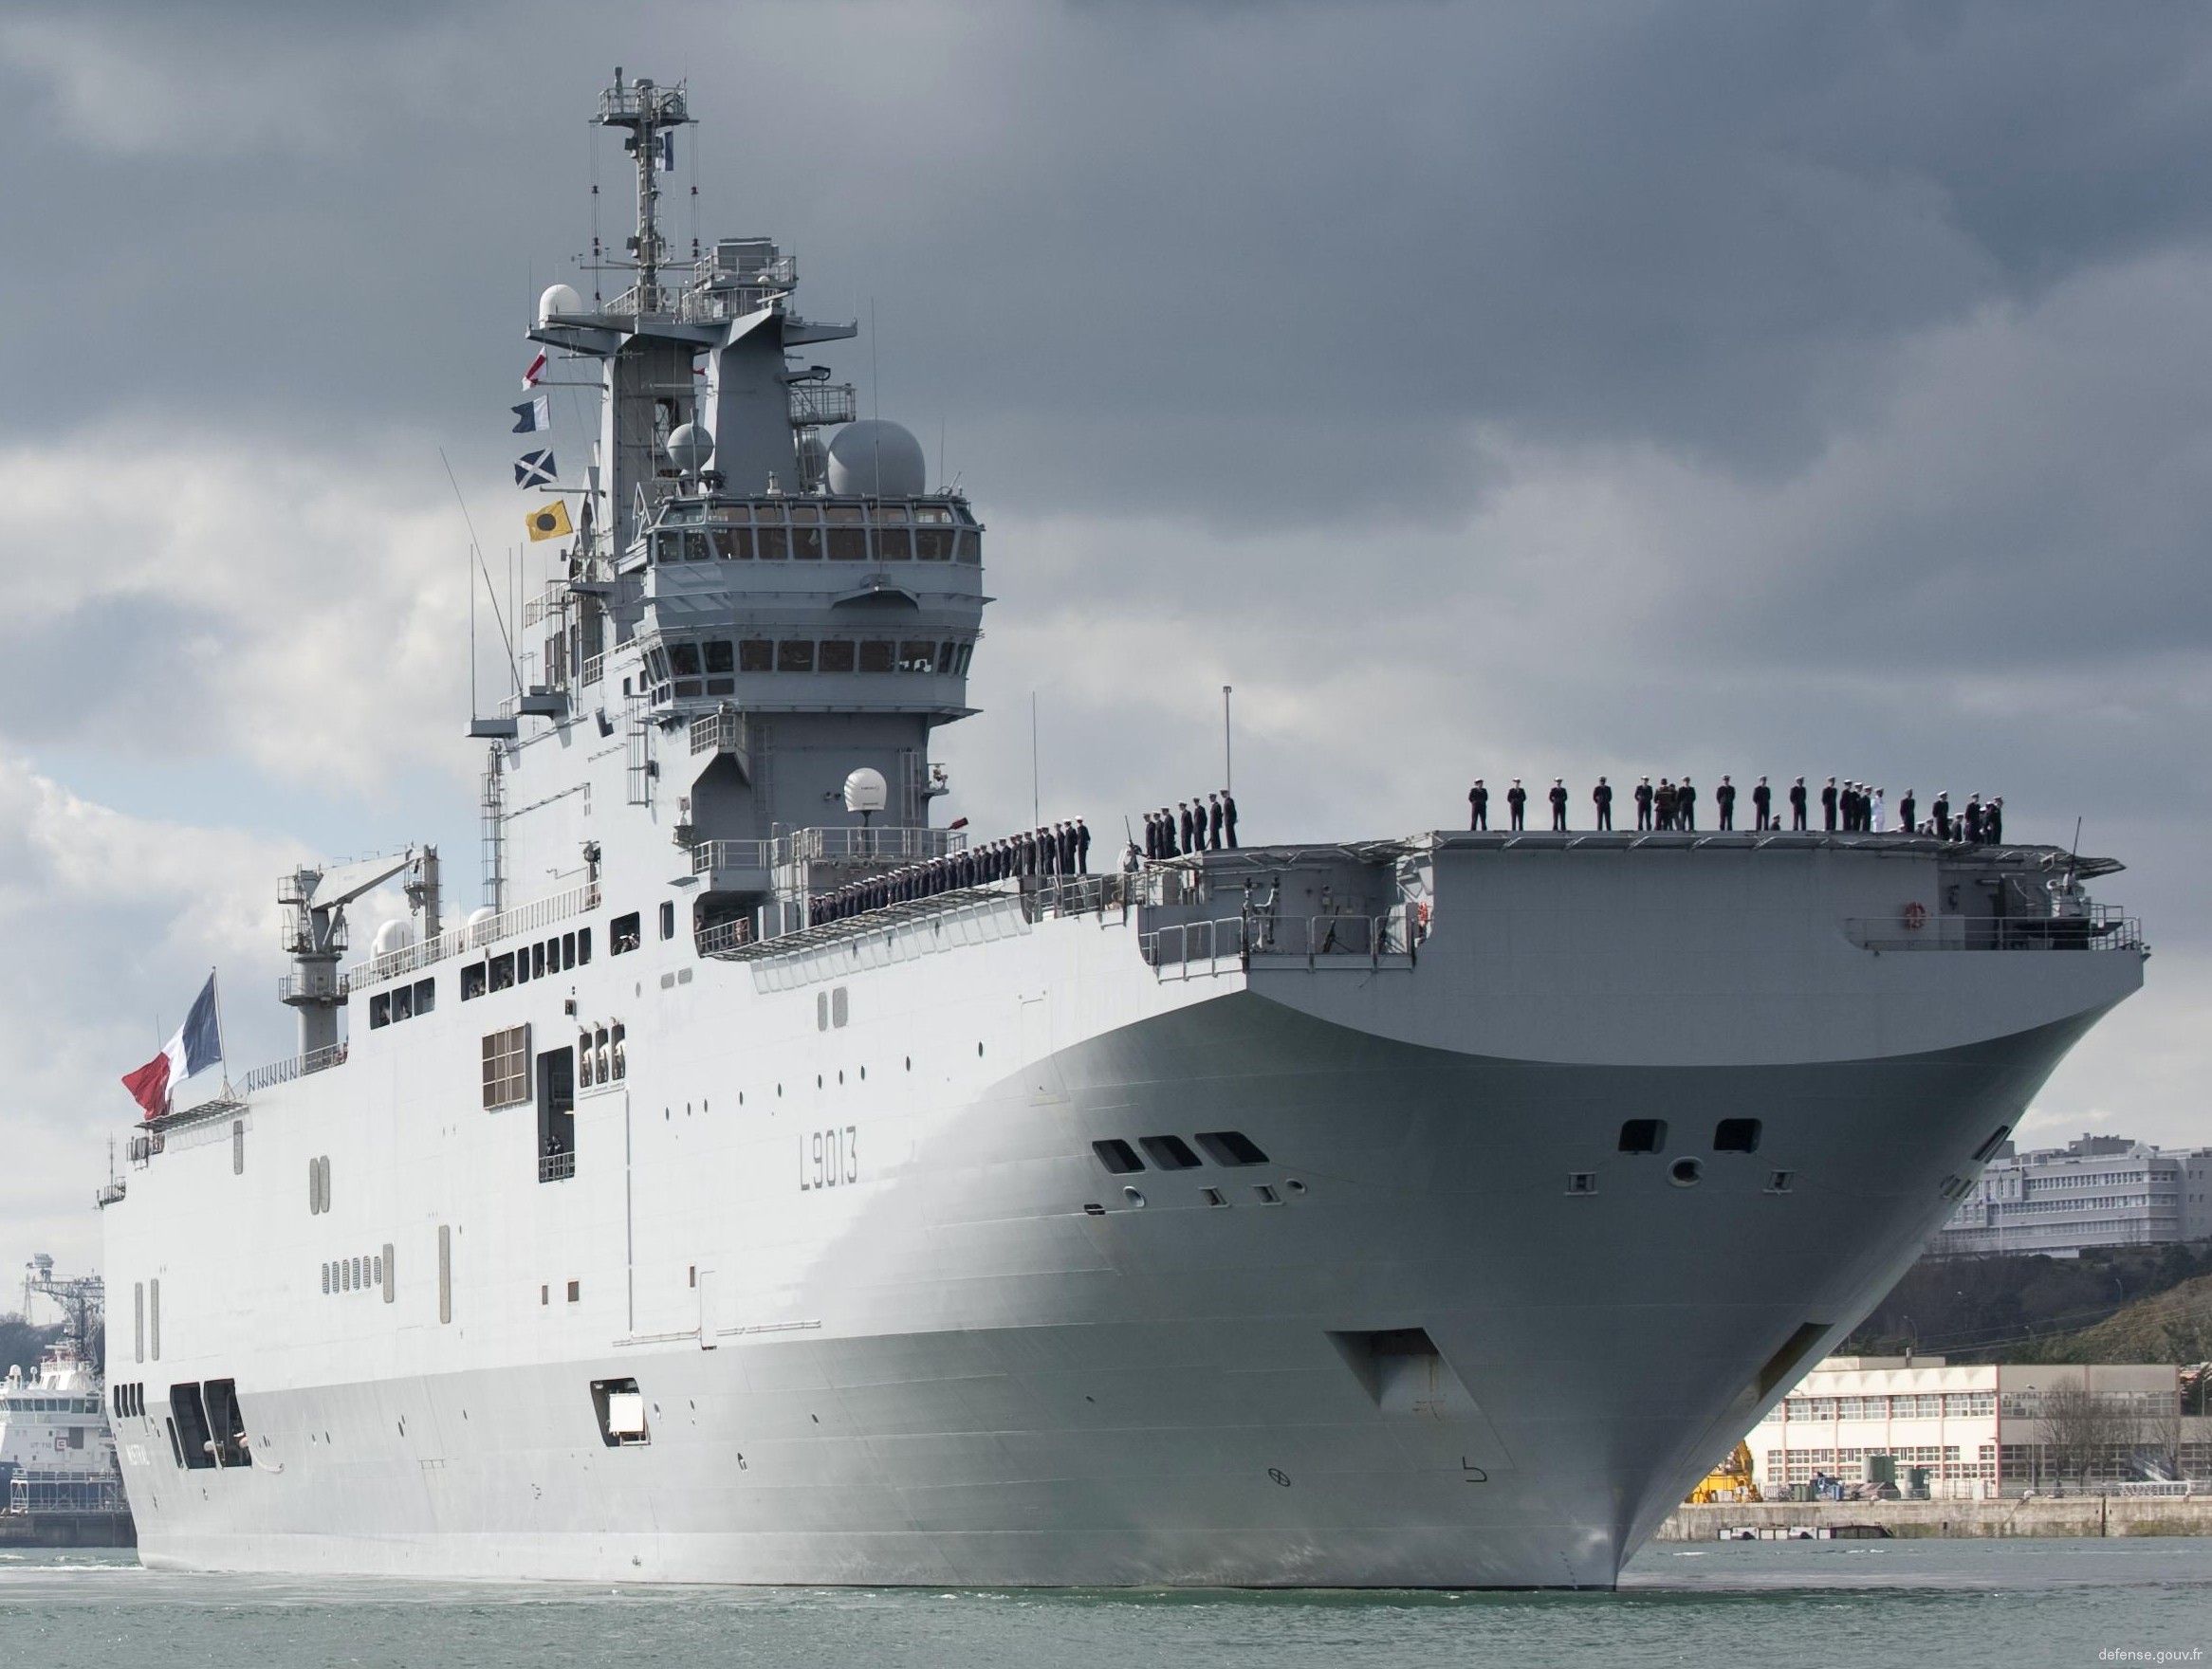 l-9013 fs mistral amphibious assault command ship french navy marine nationale 33